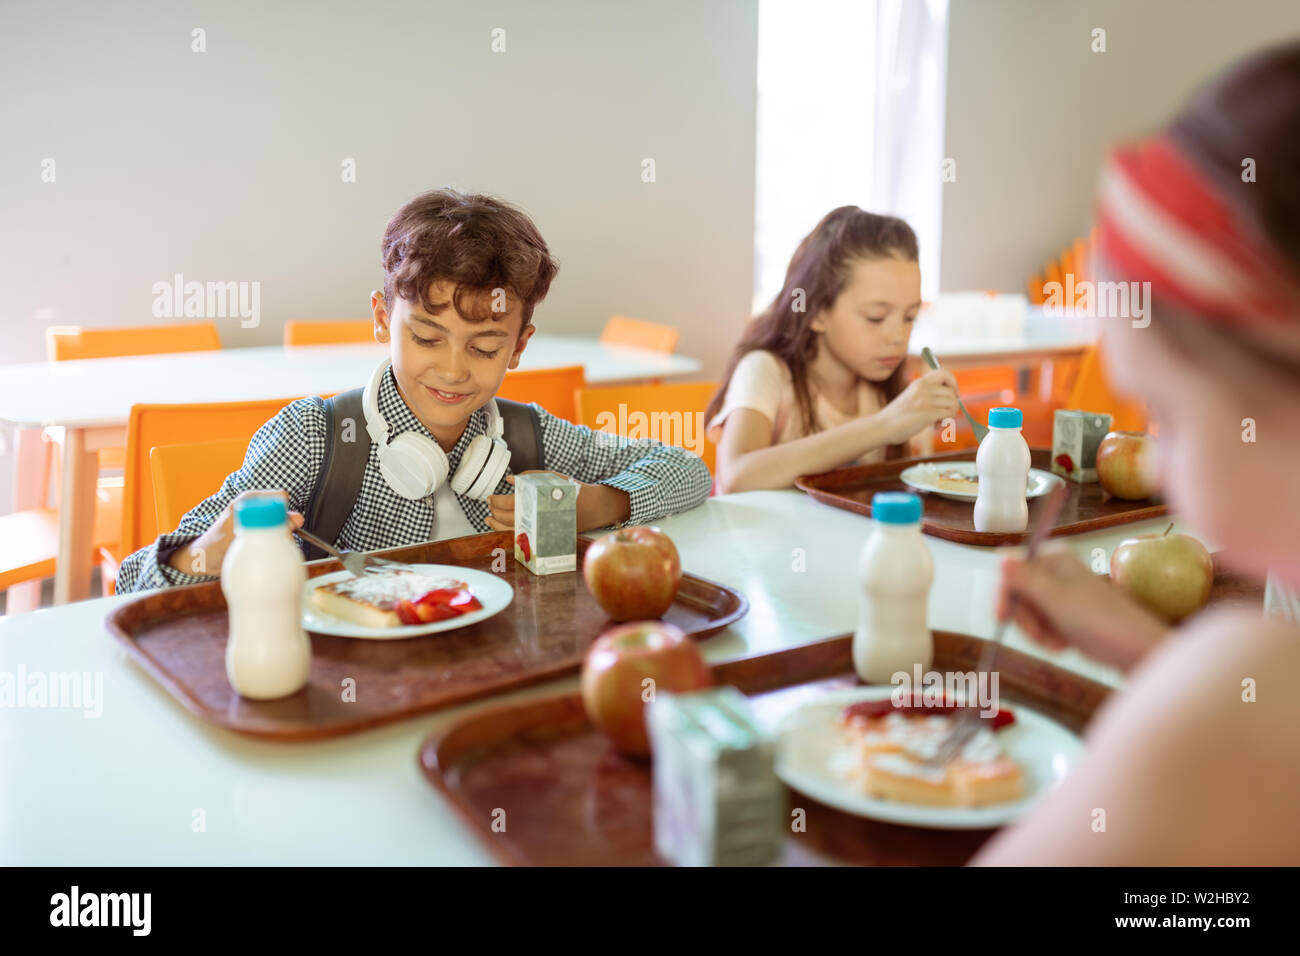 https://c8.alamy.com/comp/W2HBY2/schoolchildren-having-yummy-lunch-in-canteen-together-W2HBY2.jpg